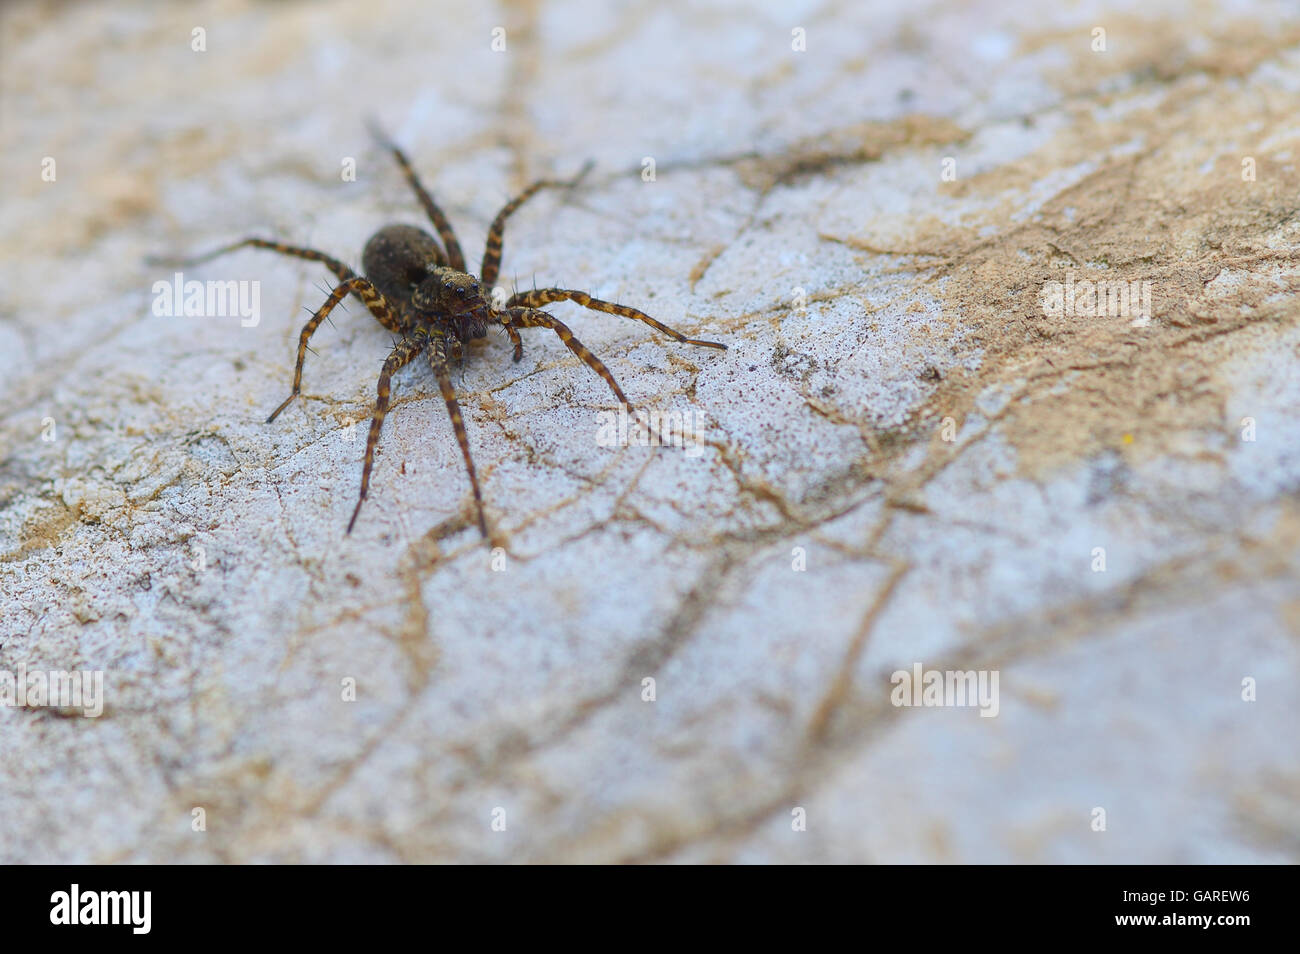 Eight legged brown wolf-spider on a rock close-up Stock Photo